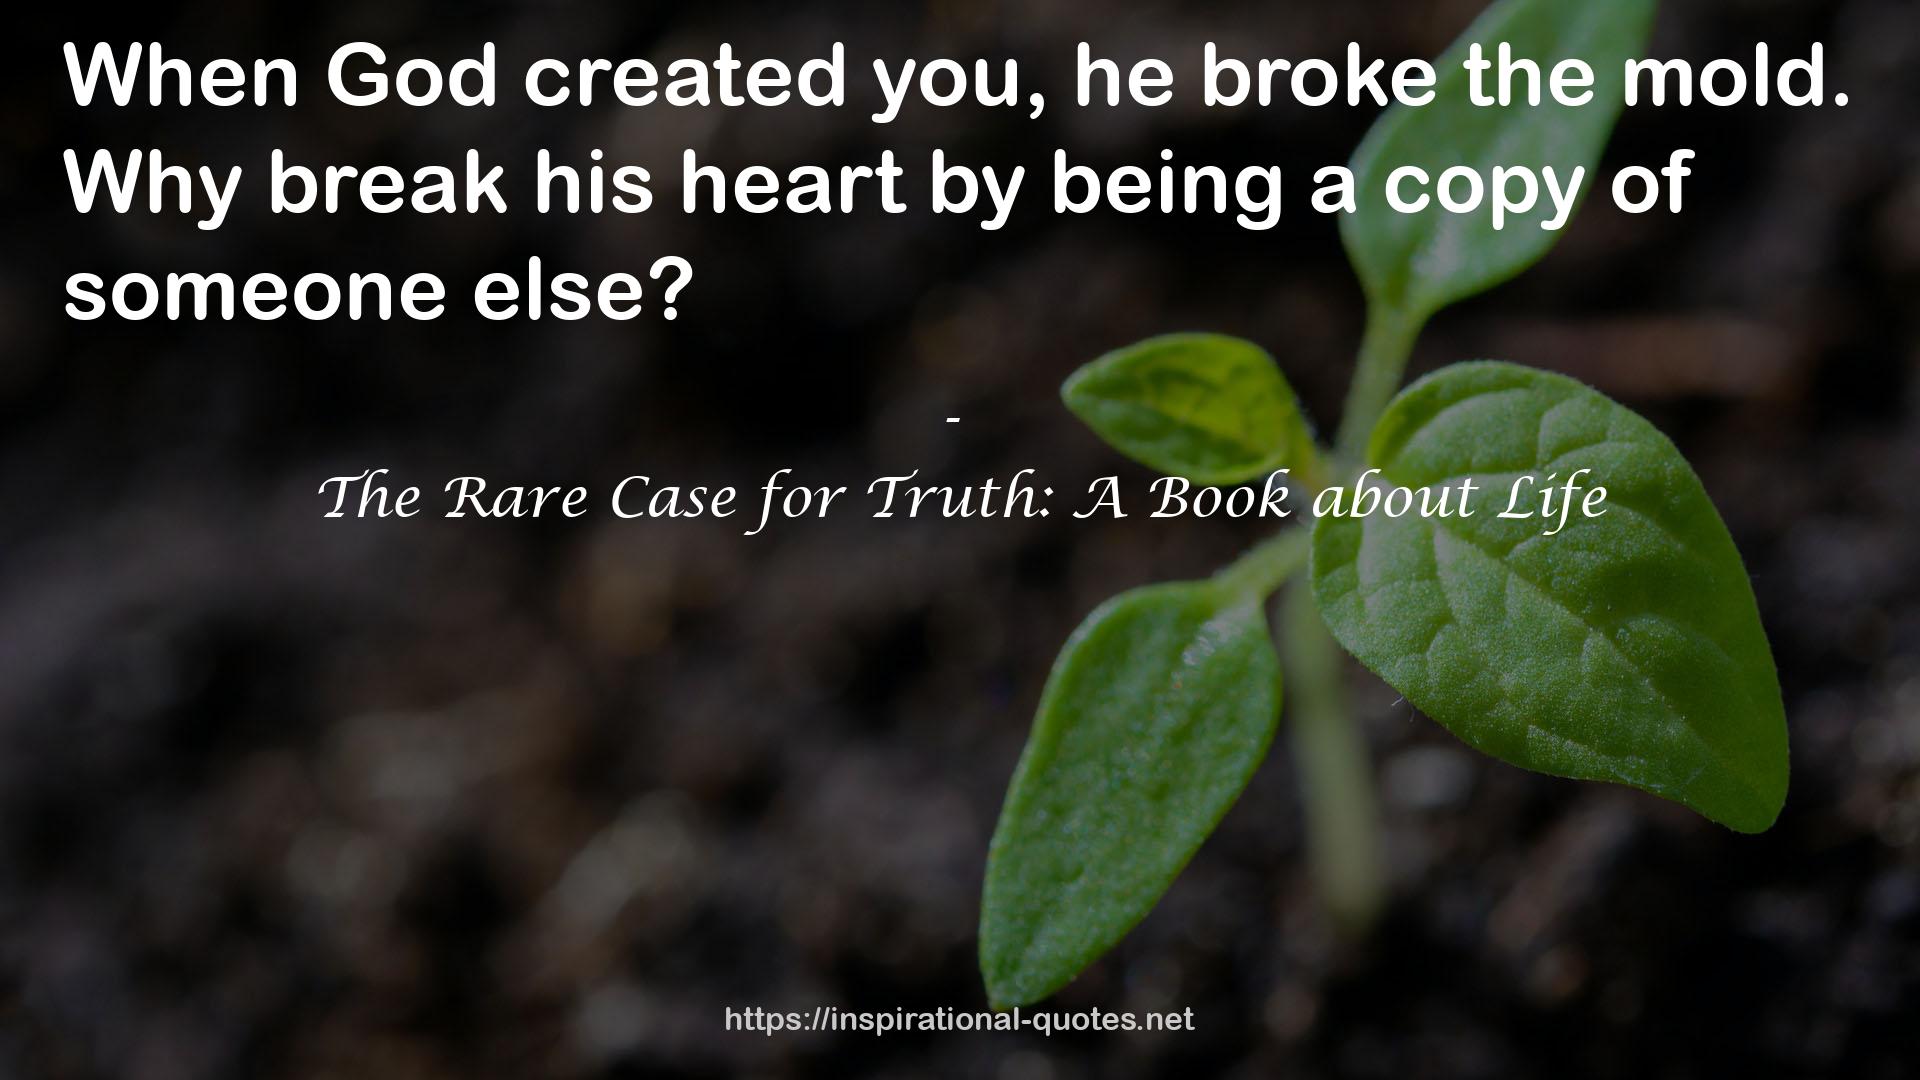 The Rare Case for Truth: A Book about Life QUOTES